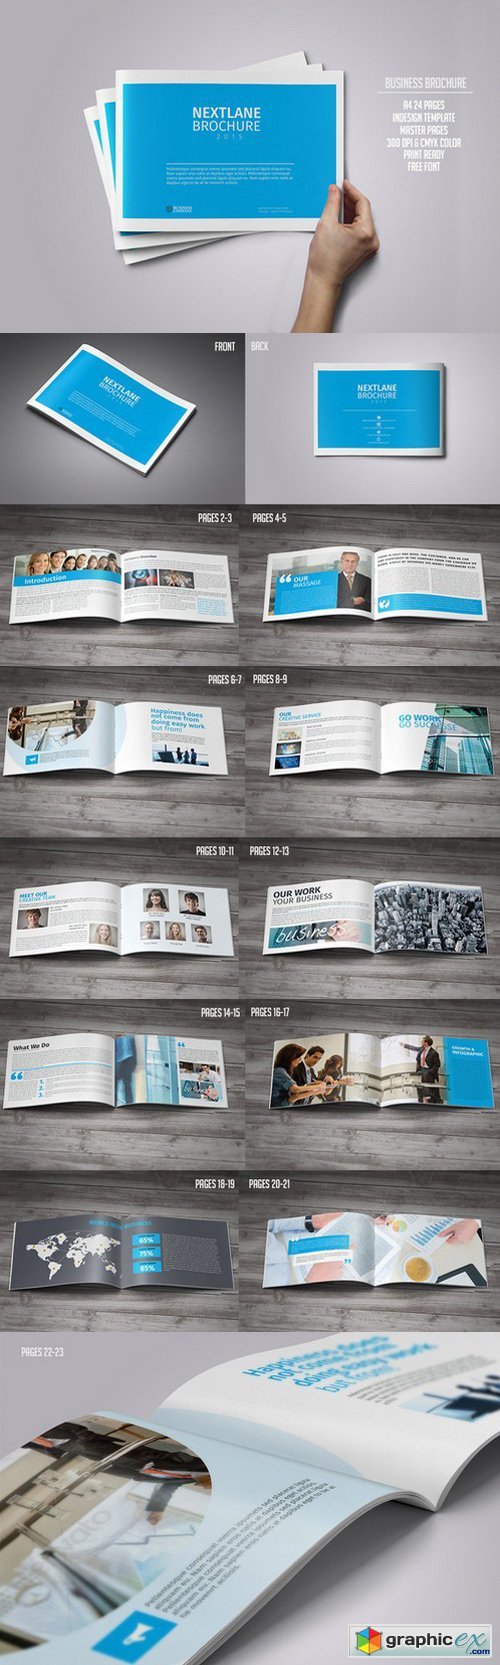 Business Brochure 24 Pages